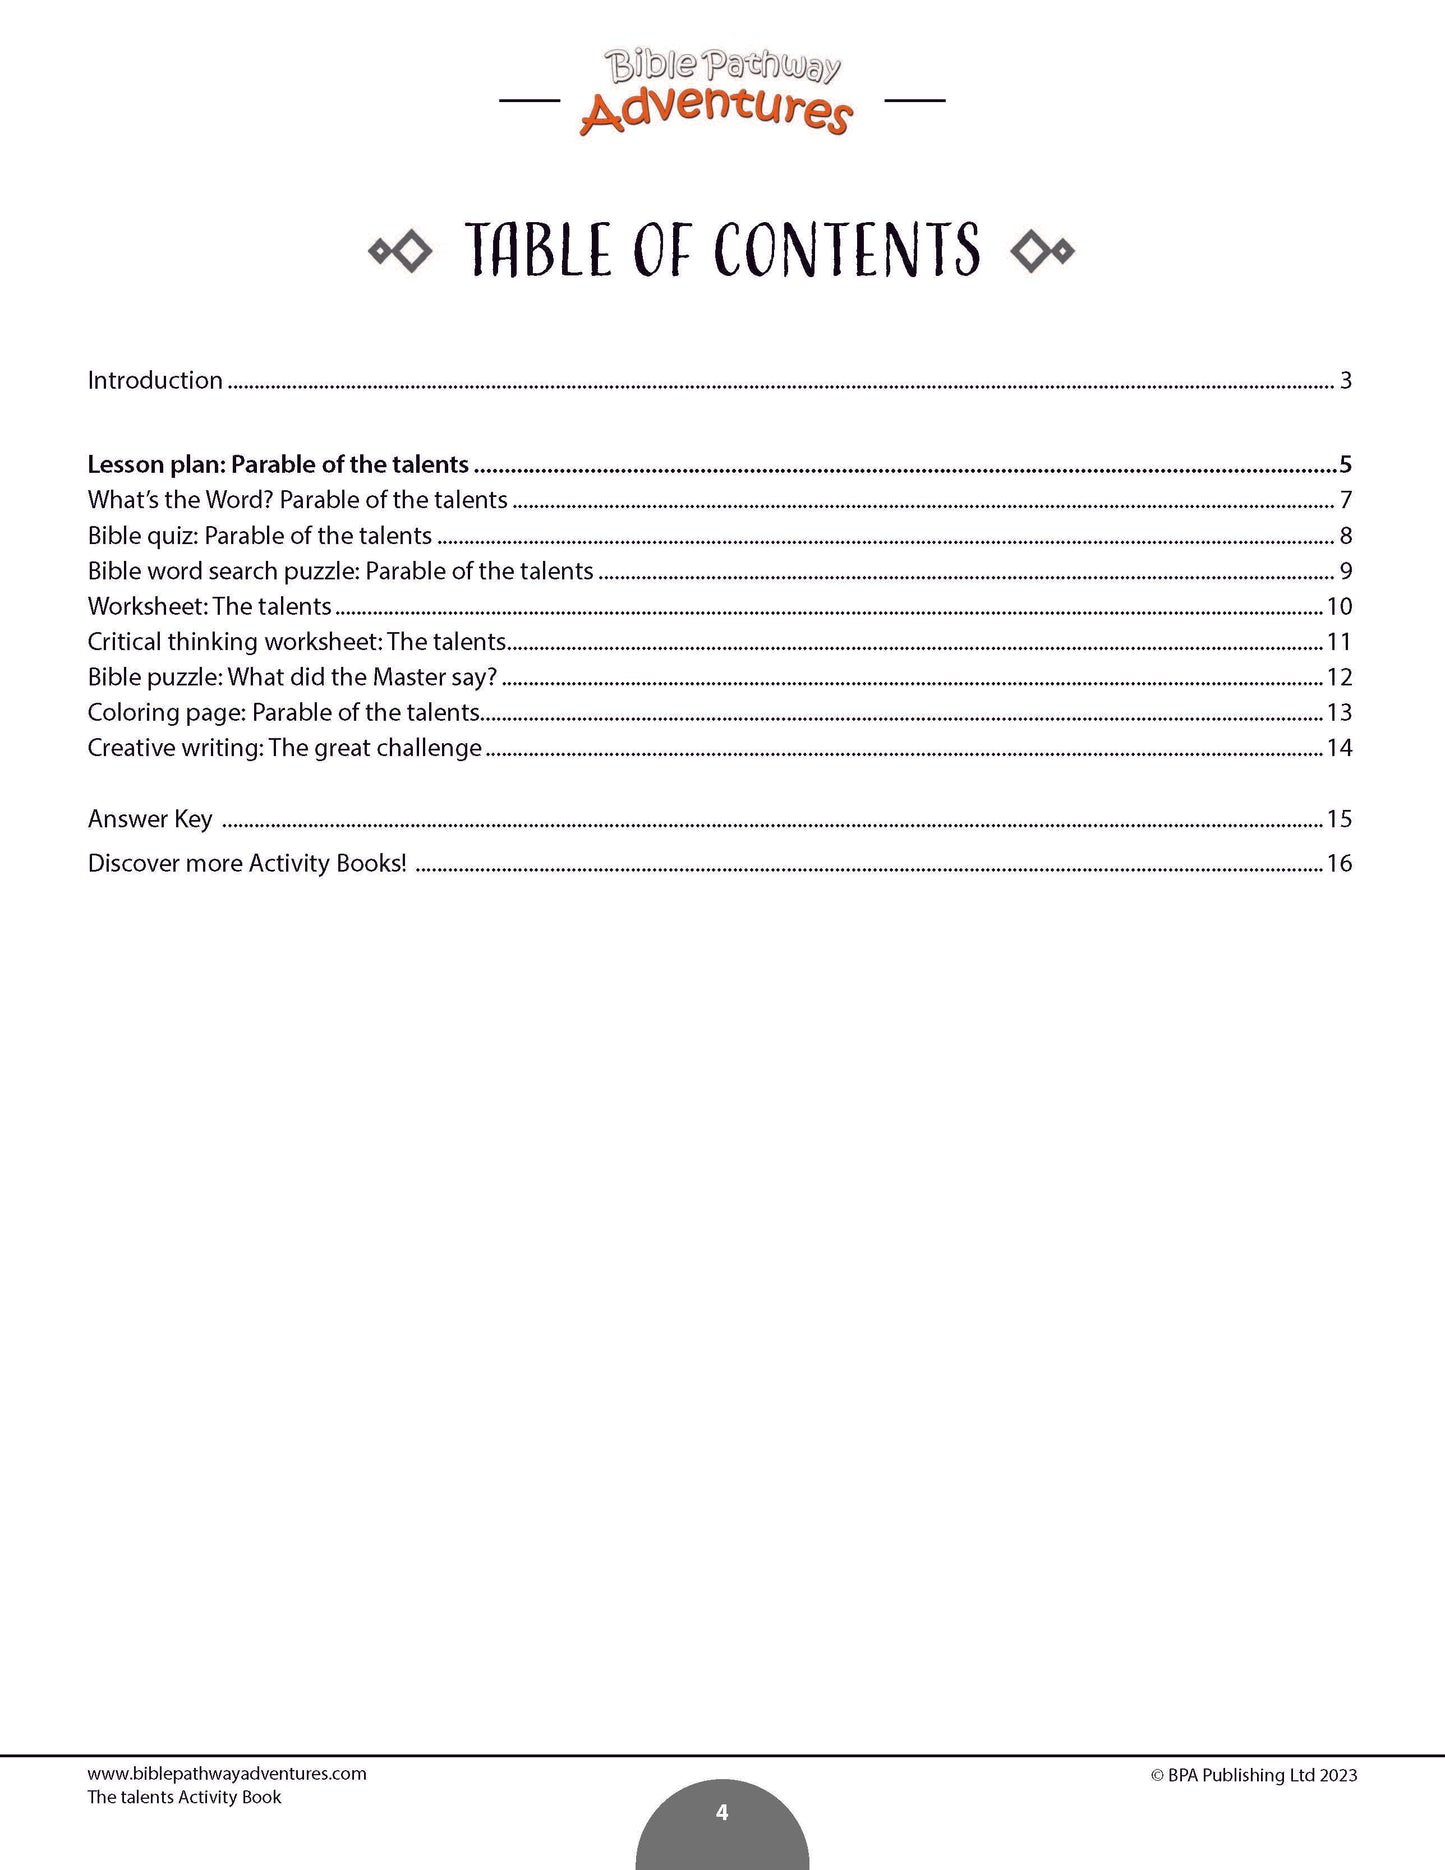 Parable of the Talents Activity Book (PDF)